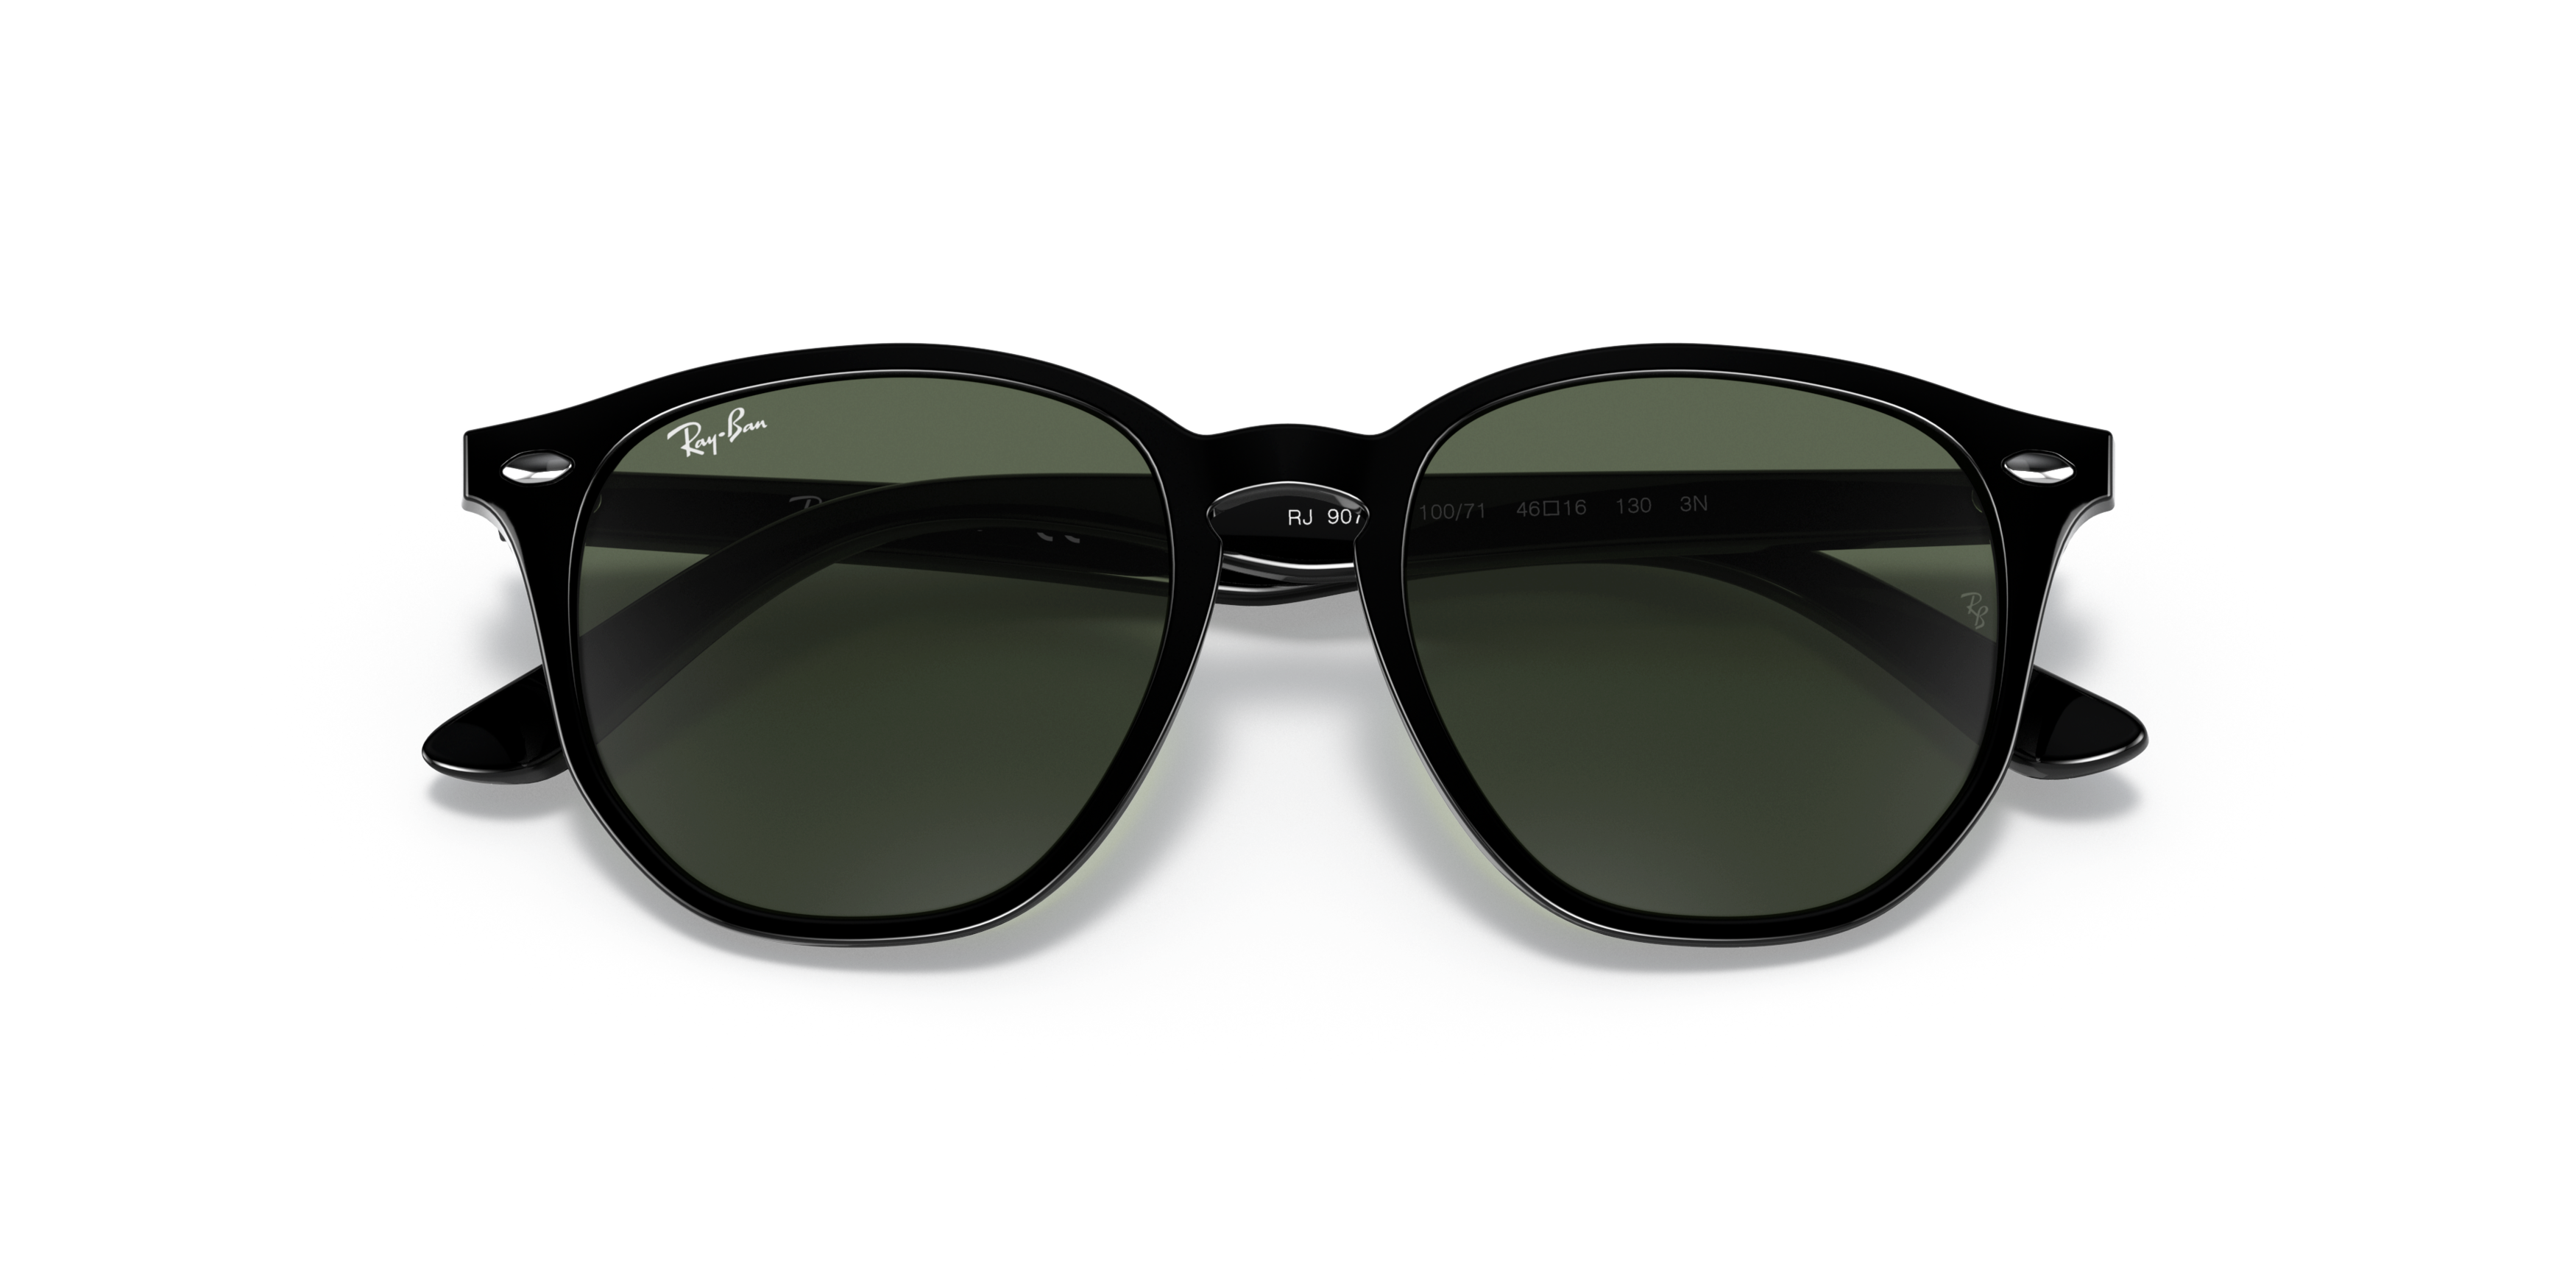 [products.image.folded] Ray-Ban RJ9070S 100/71